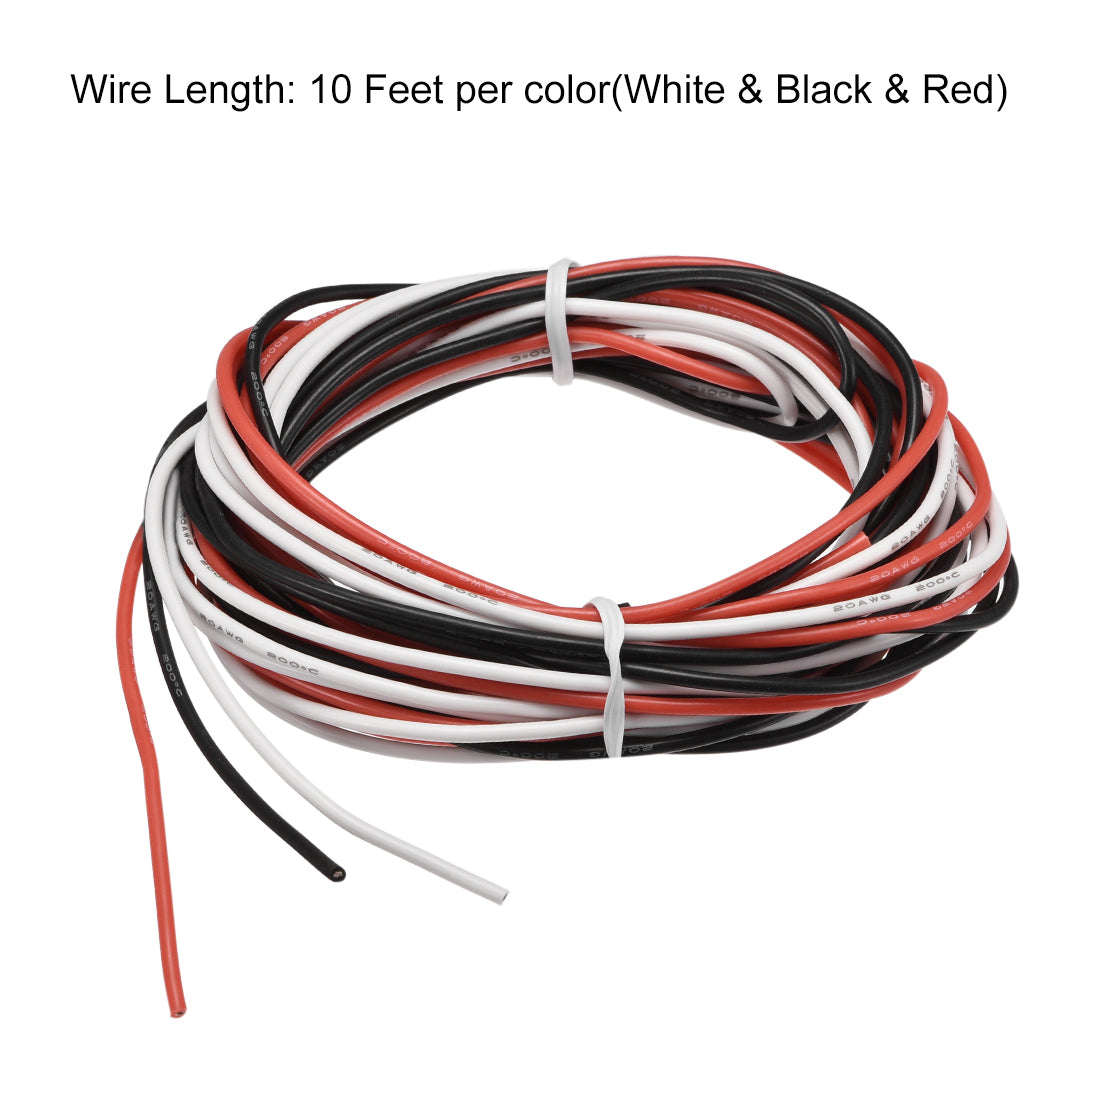 uxcell Uxcell Silicone Wire 20 AWG Electric Wire Stranded Wire 10 ft White & Black & Red